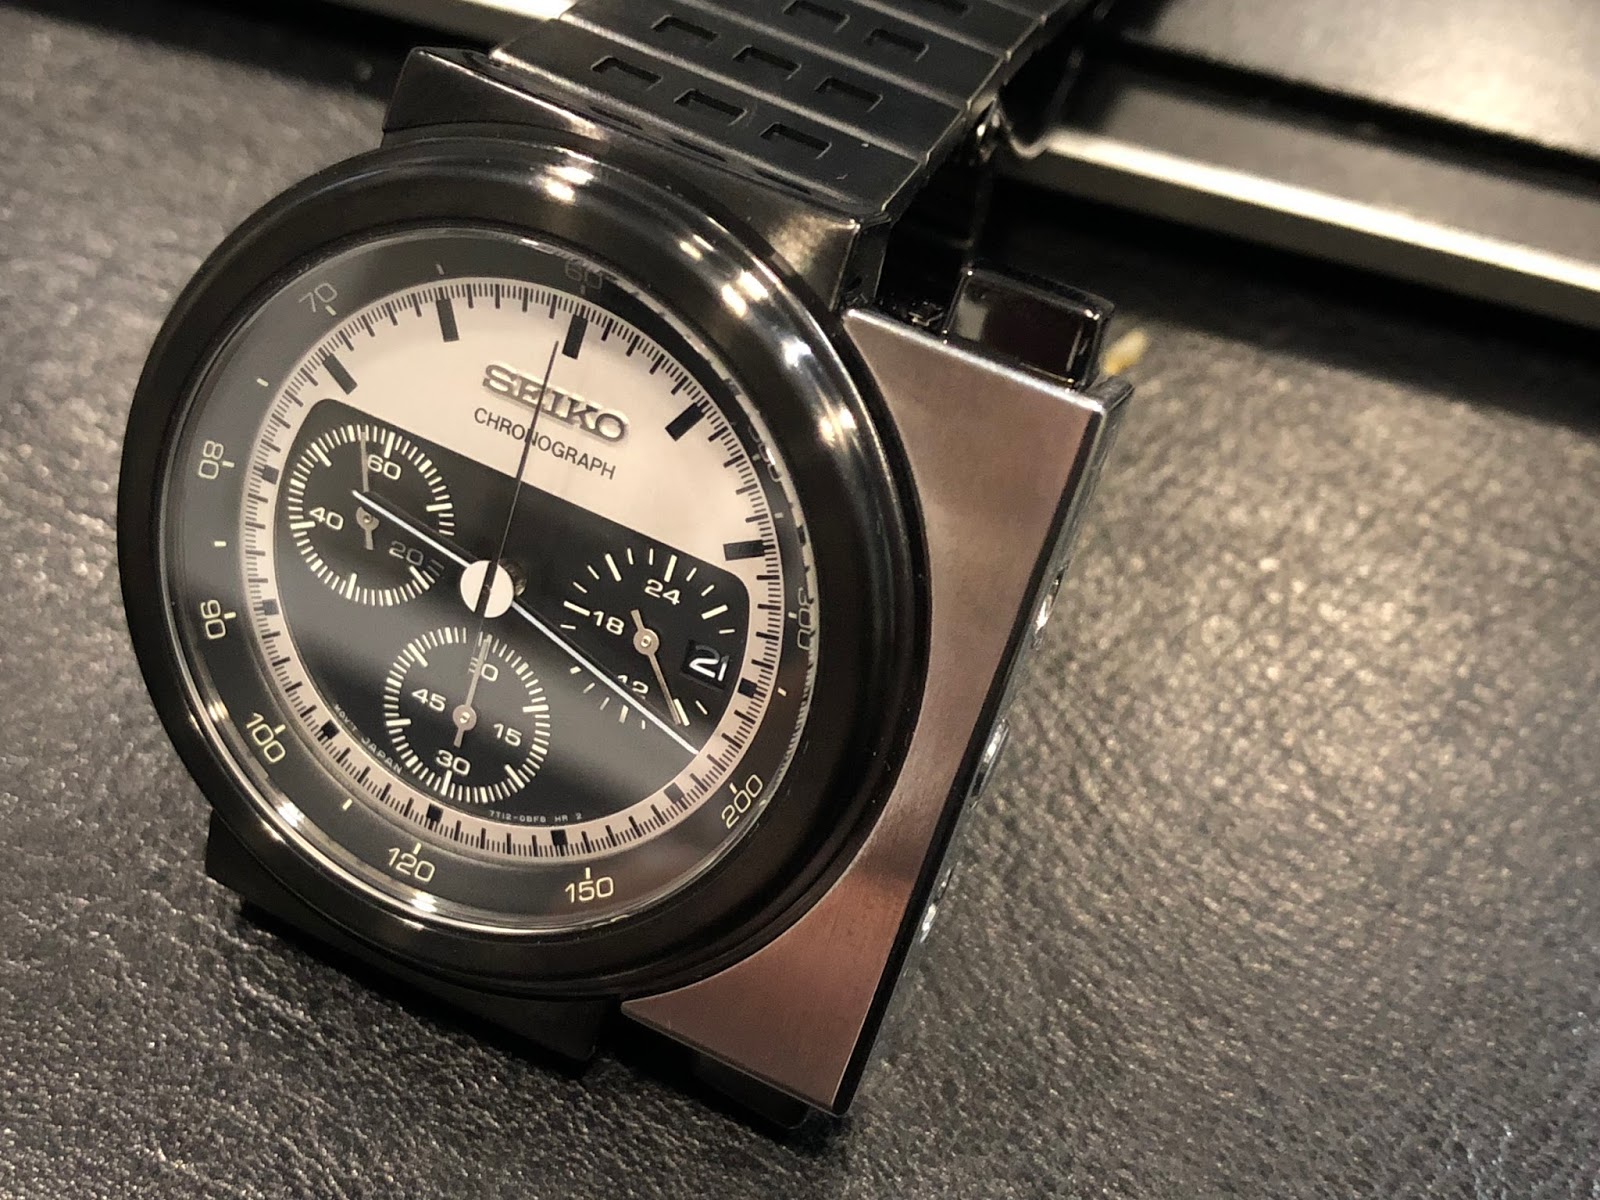 My Eastern Watch Collection: Seiko Spirit Chronograph Giugiaro Design  'Ripley Aliens' Limited Edition SCED041 - Cute and Quirky Timepiece that  Speaks Volume, A Review (plus Video)